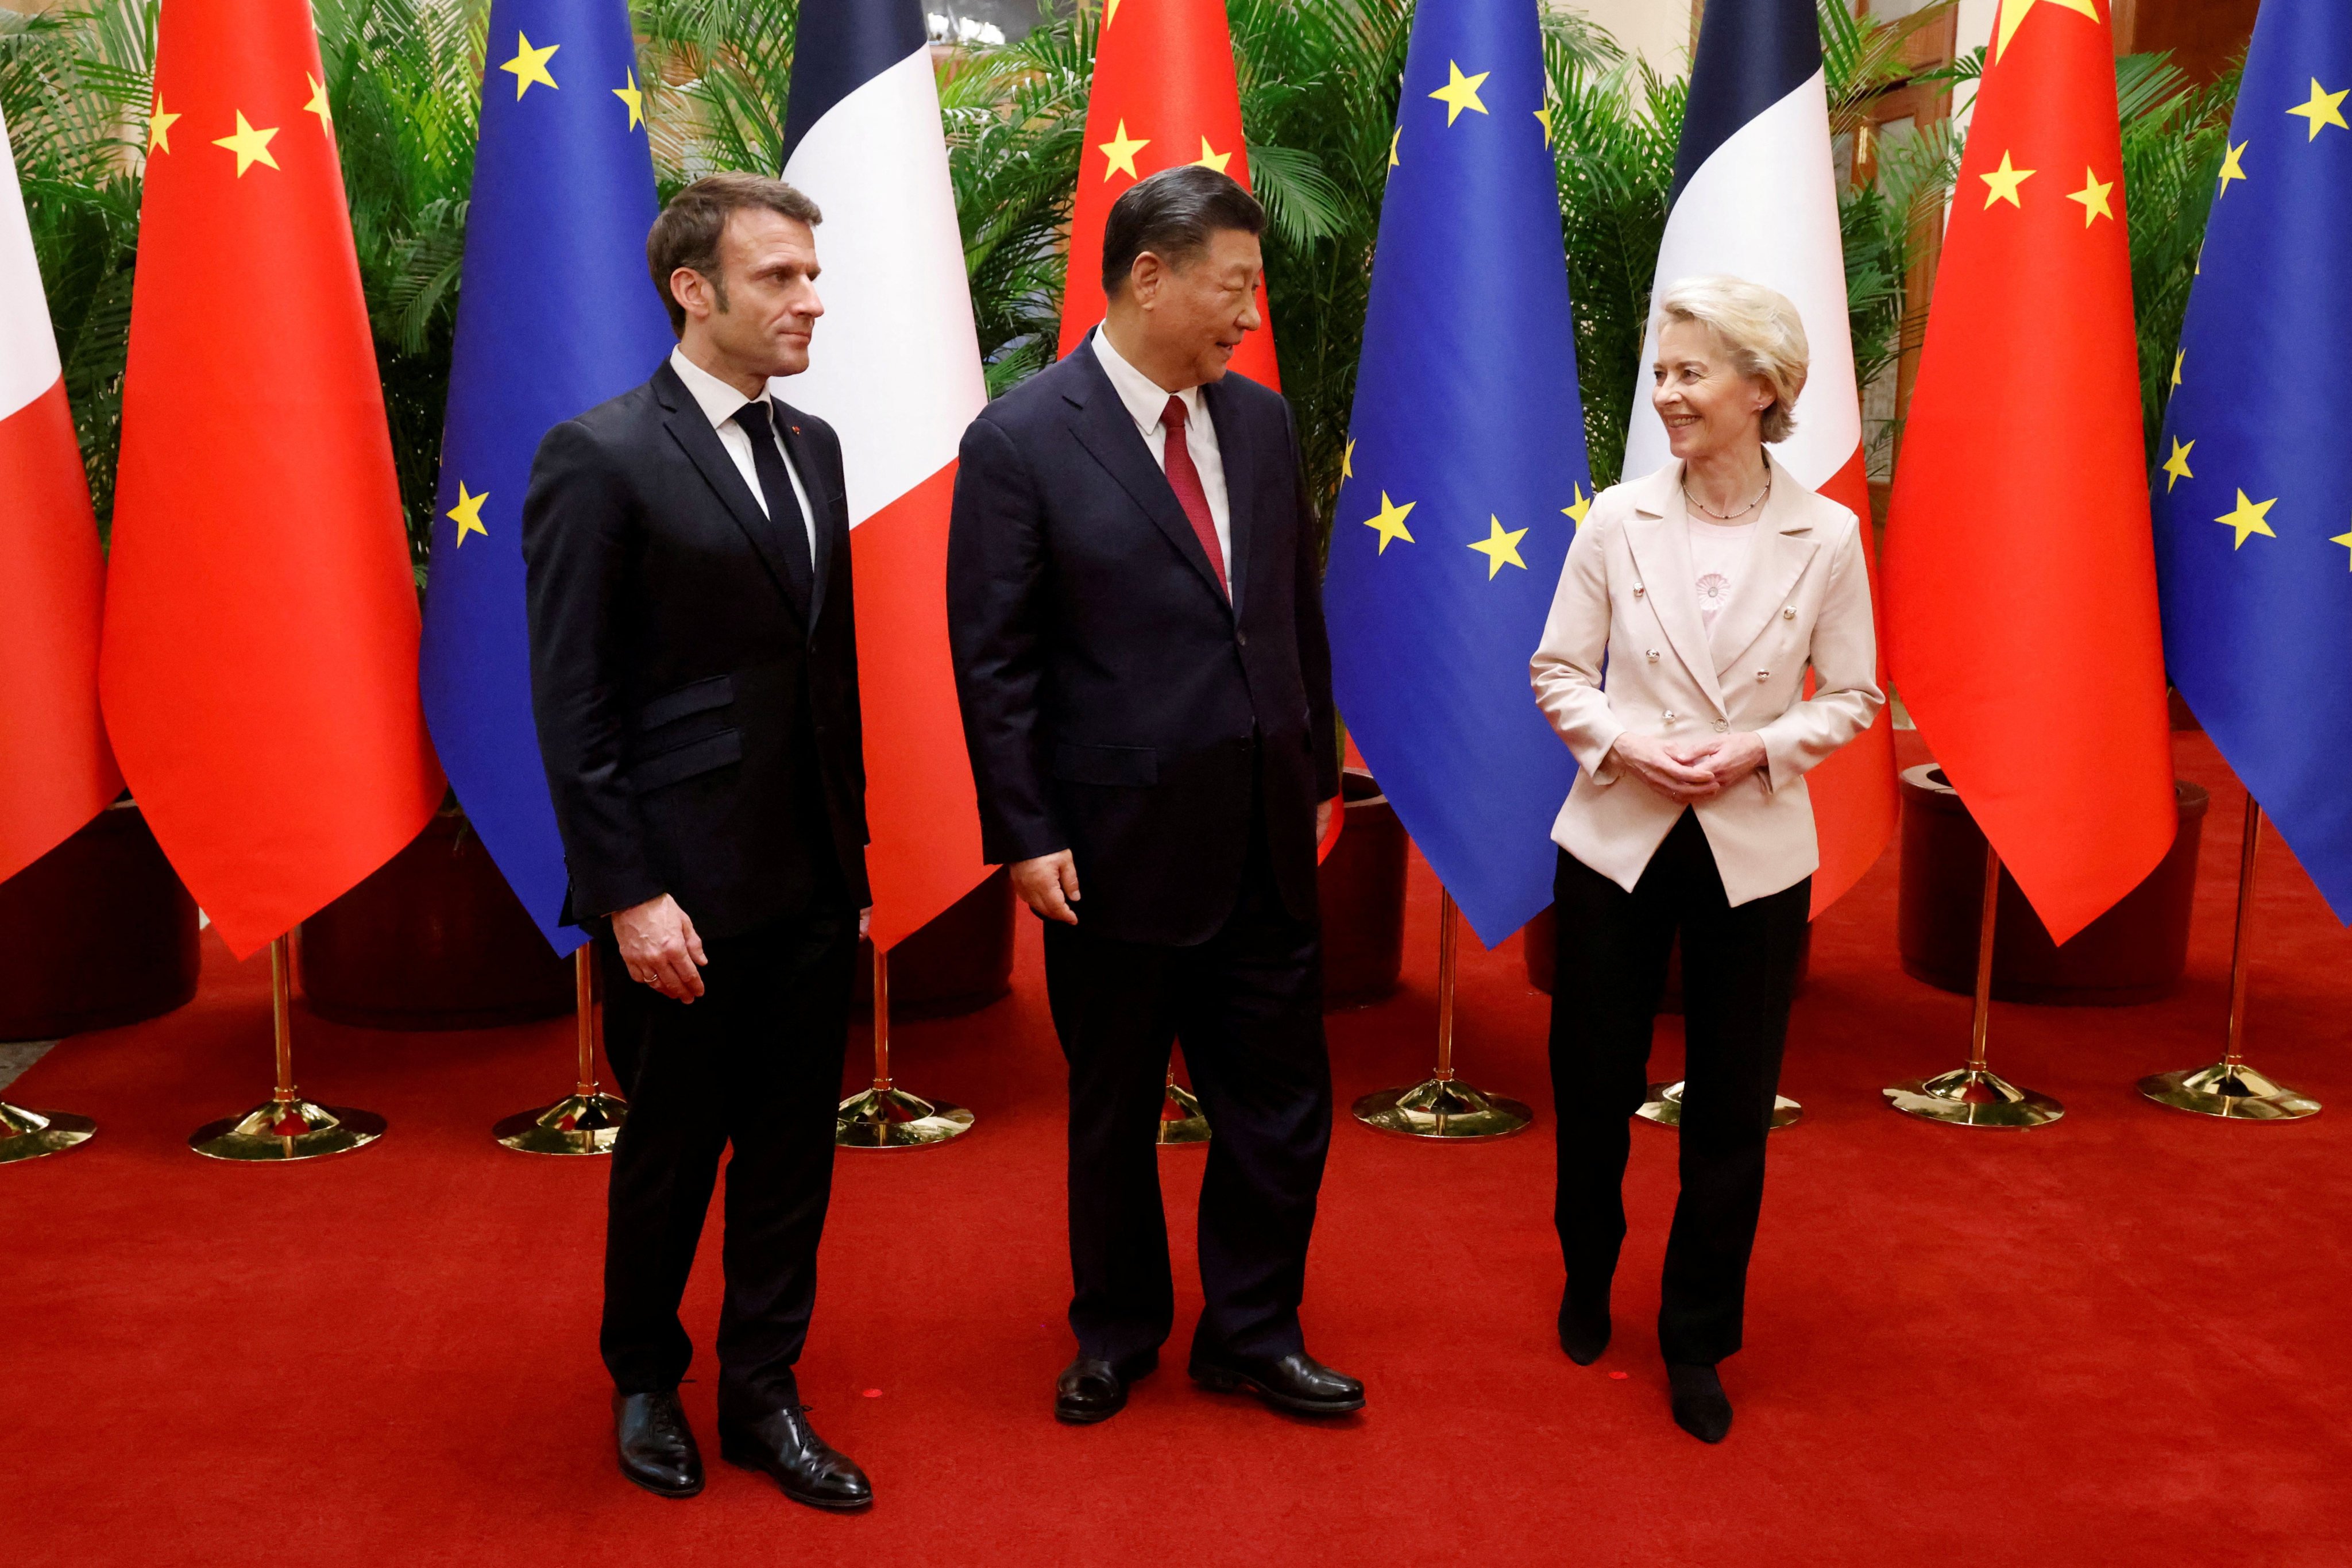 Chinese President Xi Jinping, French President Emmanuel Macron and European Commission president Ursula von de Leyen meet for a working session in Beijing on April 6. European division on China was evident during Macron and der Leyen’s recent visit. Photo: Reuters